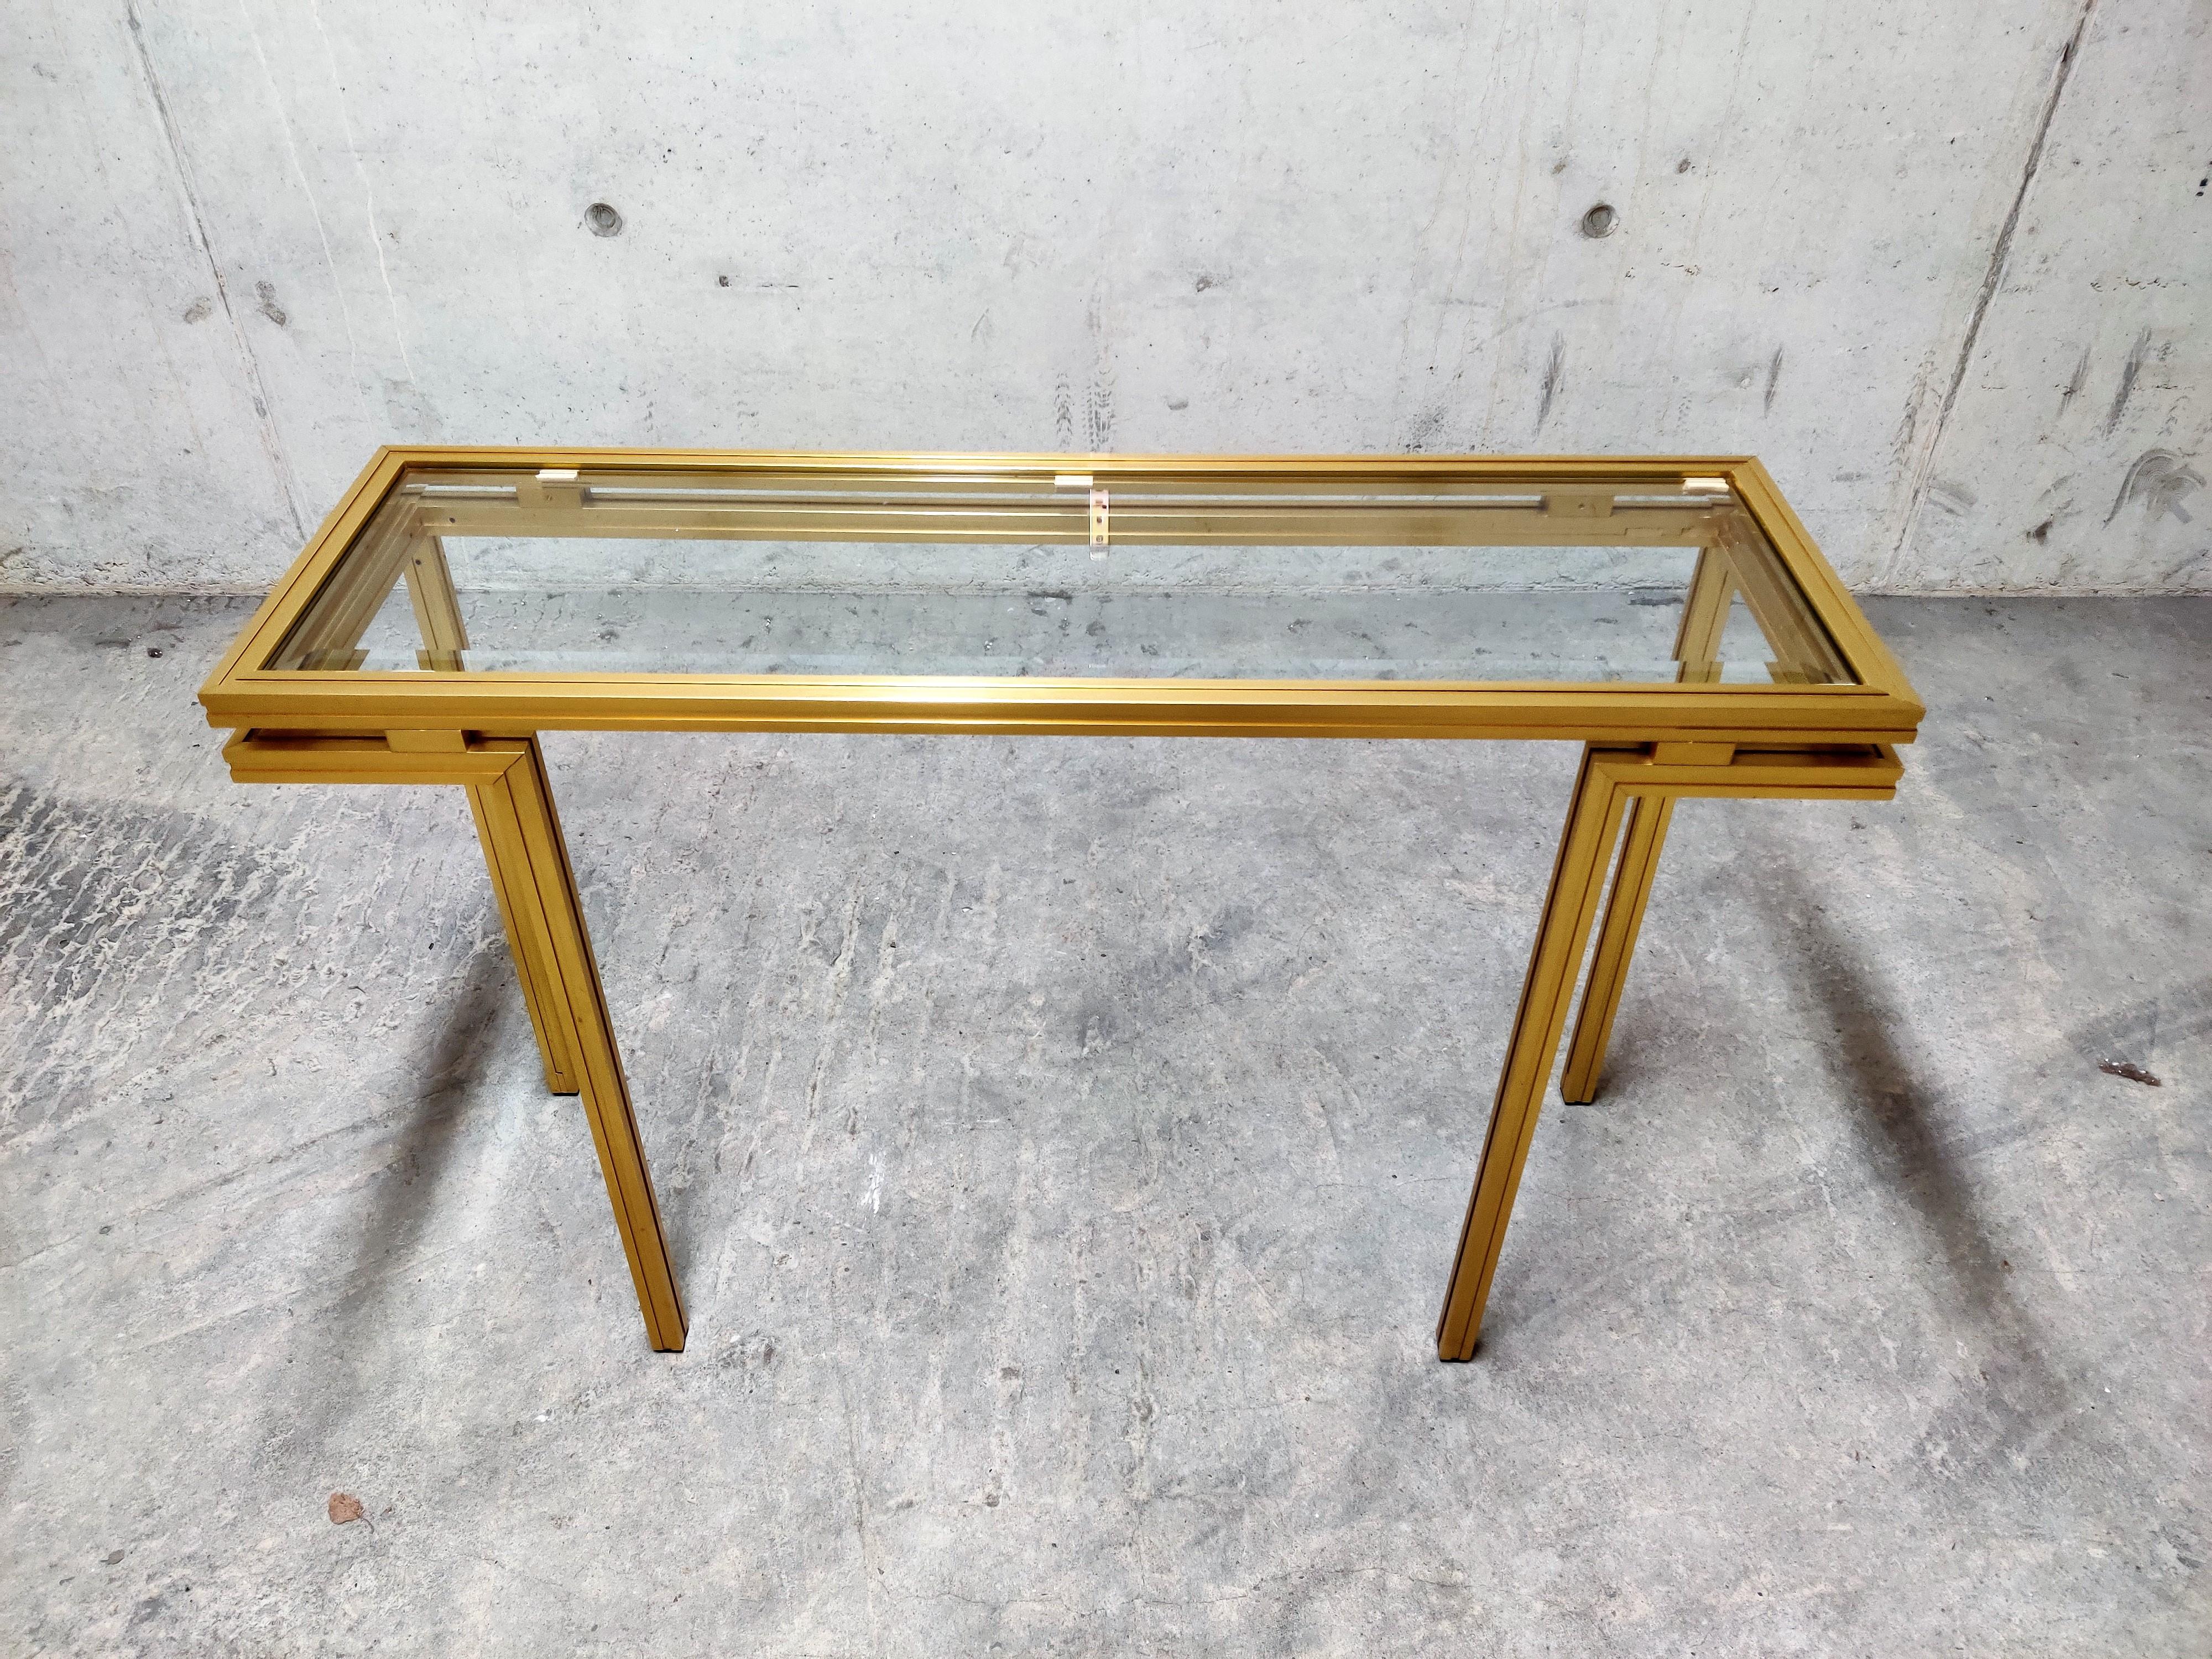 Vintage brass console table by Pierre Vandel.

This geometrical design console table has a clear beveled glass top.

Hollywood regency style.

Perfect condition.

1980s, France

Dimensions:
Height 74cm/29.13